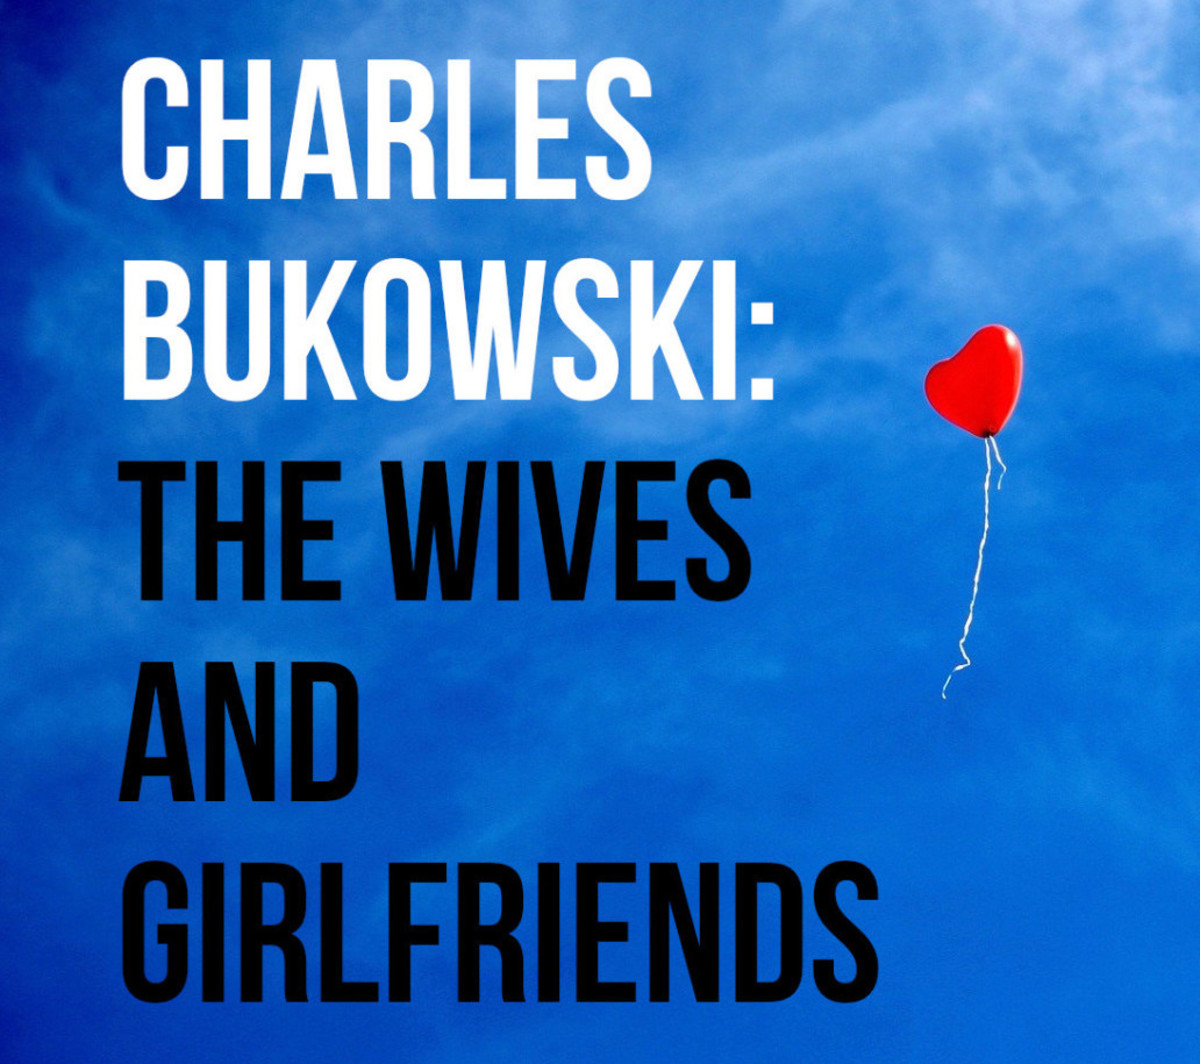 The Wives and Girlfriends of Charles Bukowski